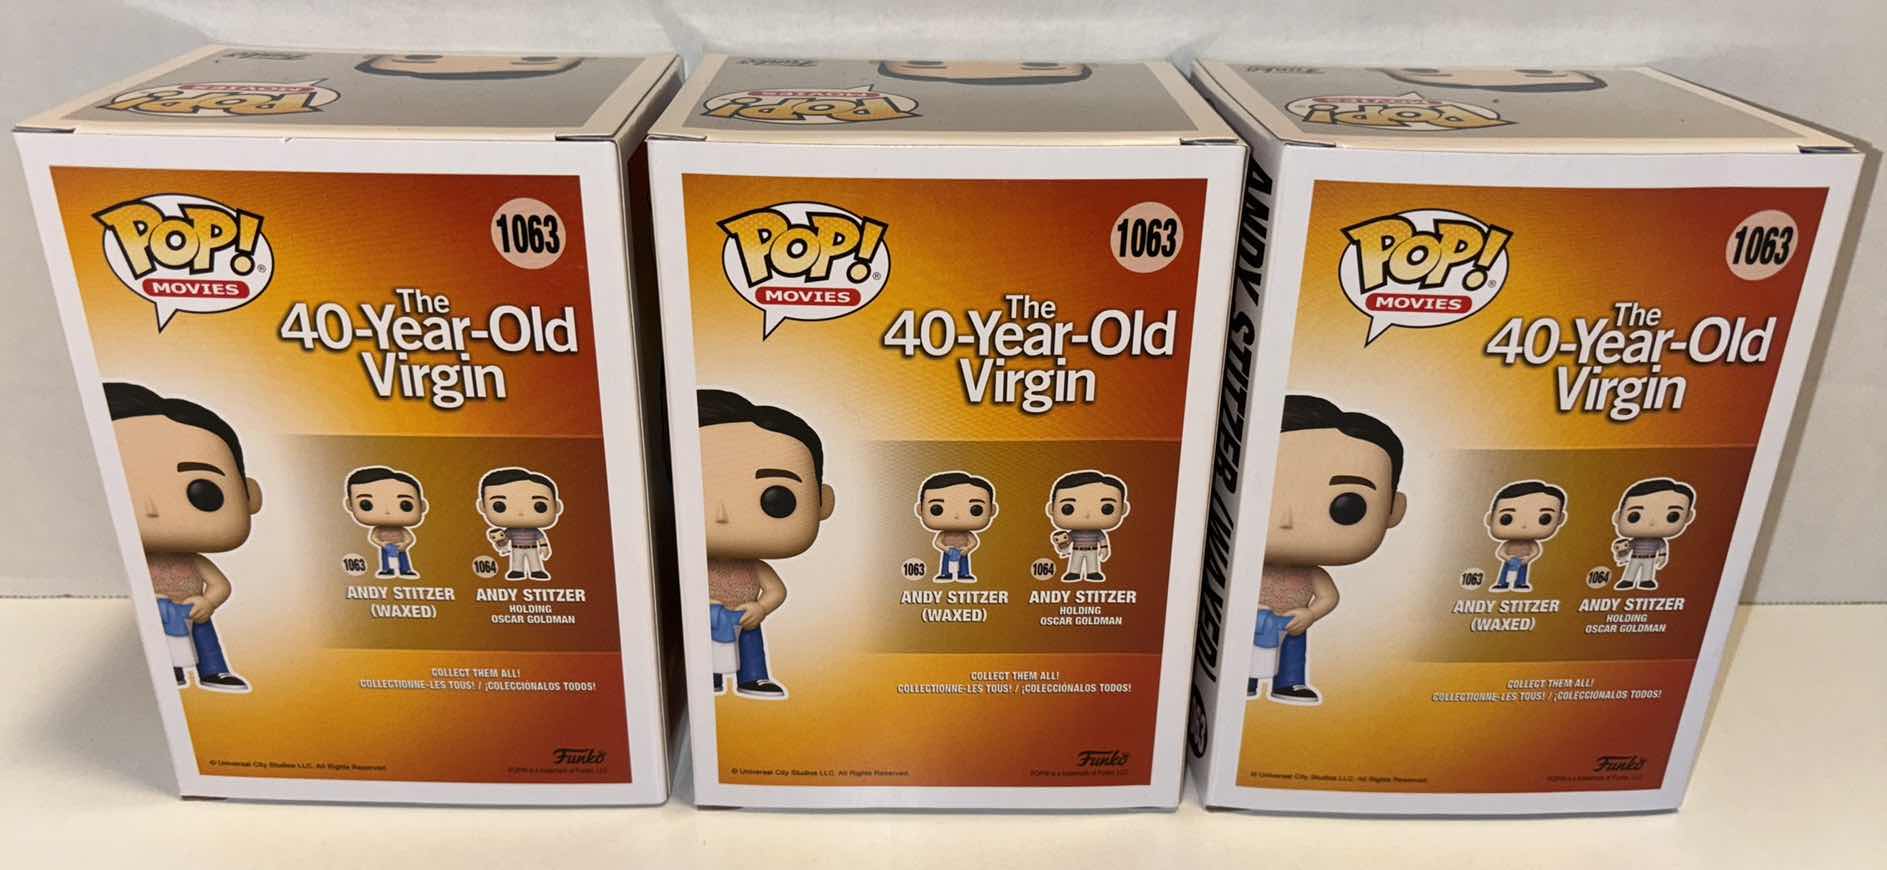 Photo 3 of NEW FUNKO POP! MOVIES 3-PACK VINYL FIGURES, THE 40-YEAR-OLD VIRGIN #1063 ANDY STITZER (WAXED)